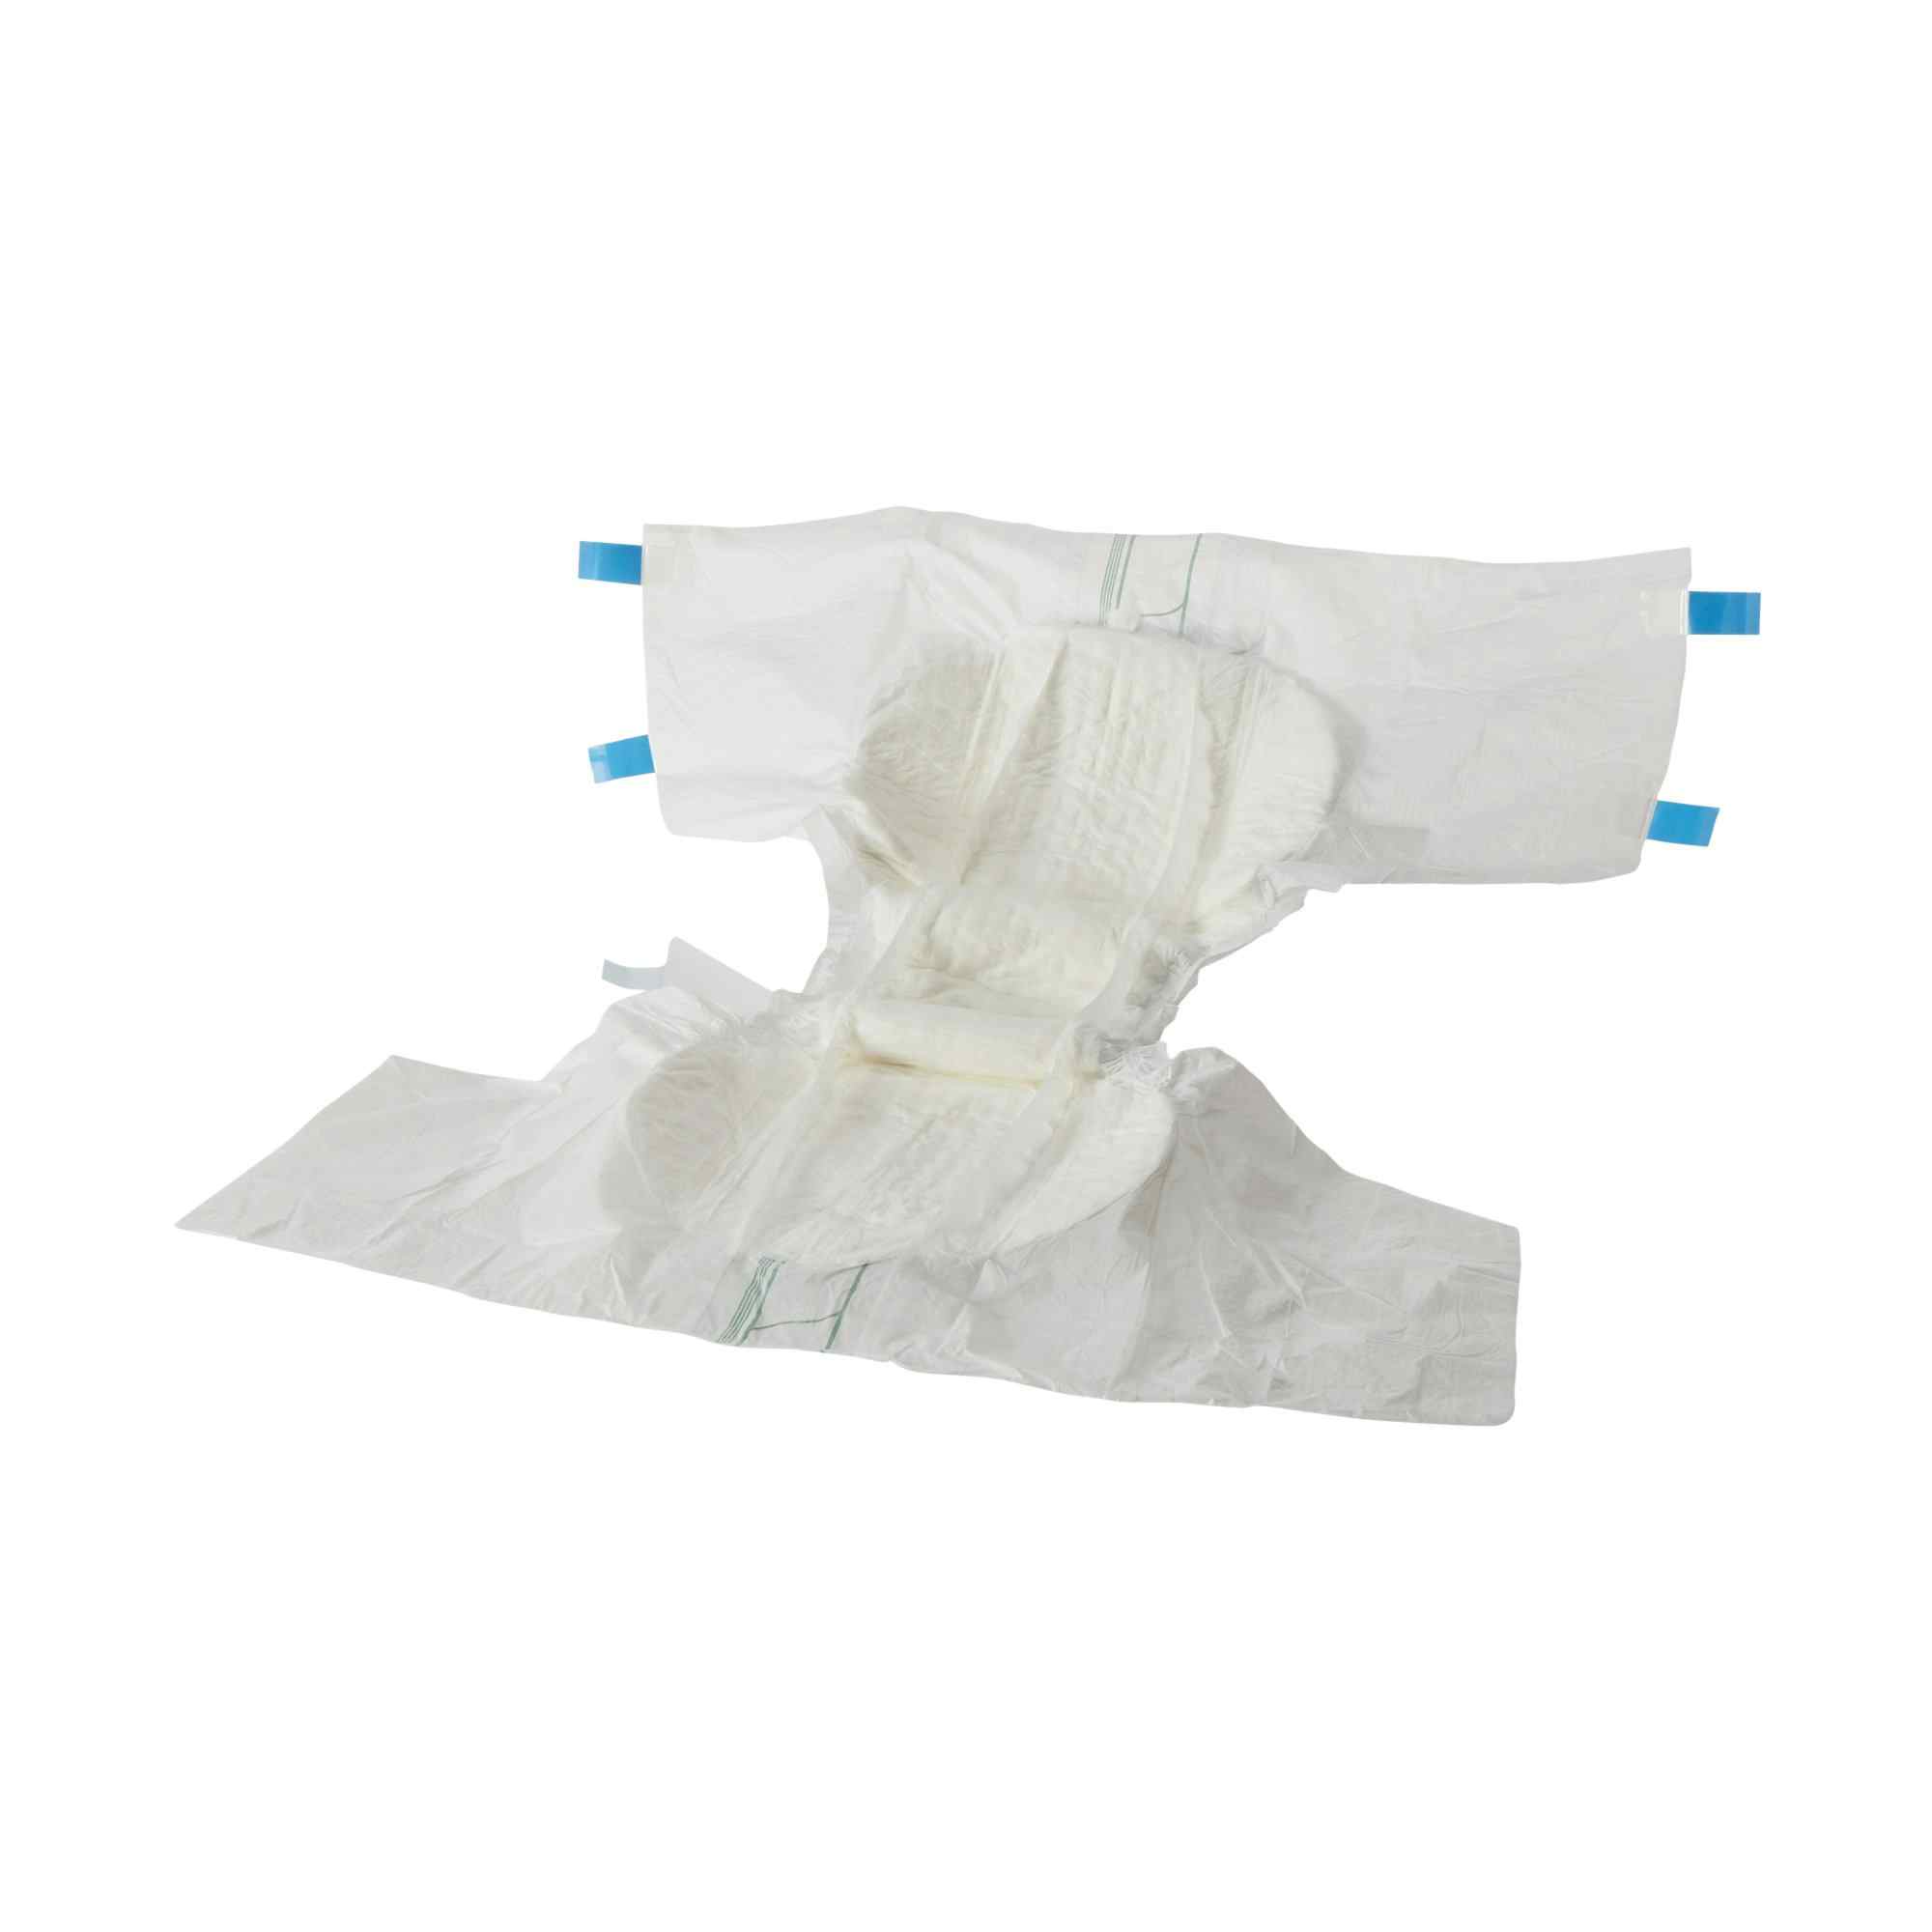 Abena Abri-Form Diapers with Tabs, L4, opened